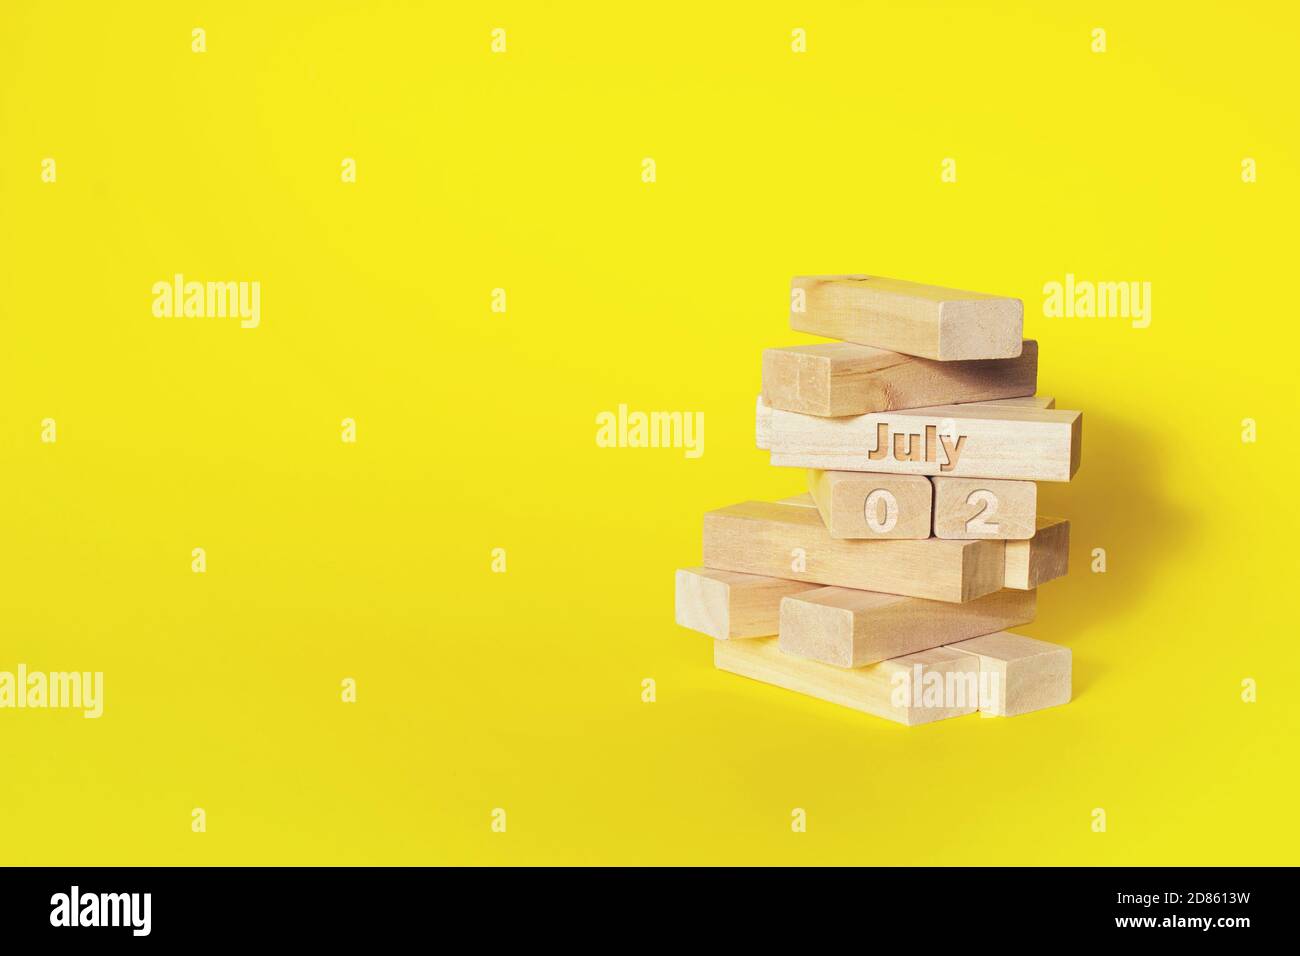 July 2nd. Day 2 of month, Calendar date. Wooden blocks folded into the tower with month and day on yellow background, with copy space. Summer month, d Stock Photo